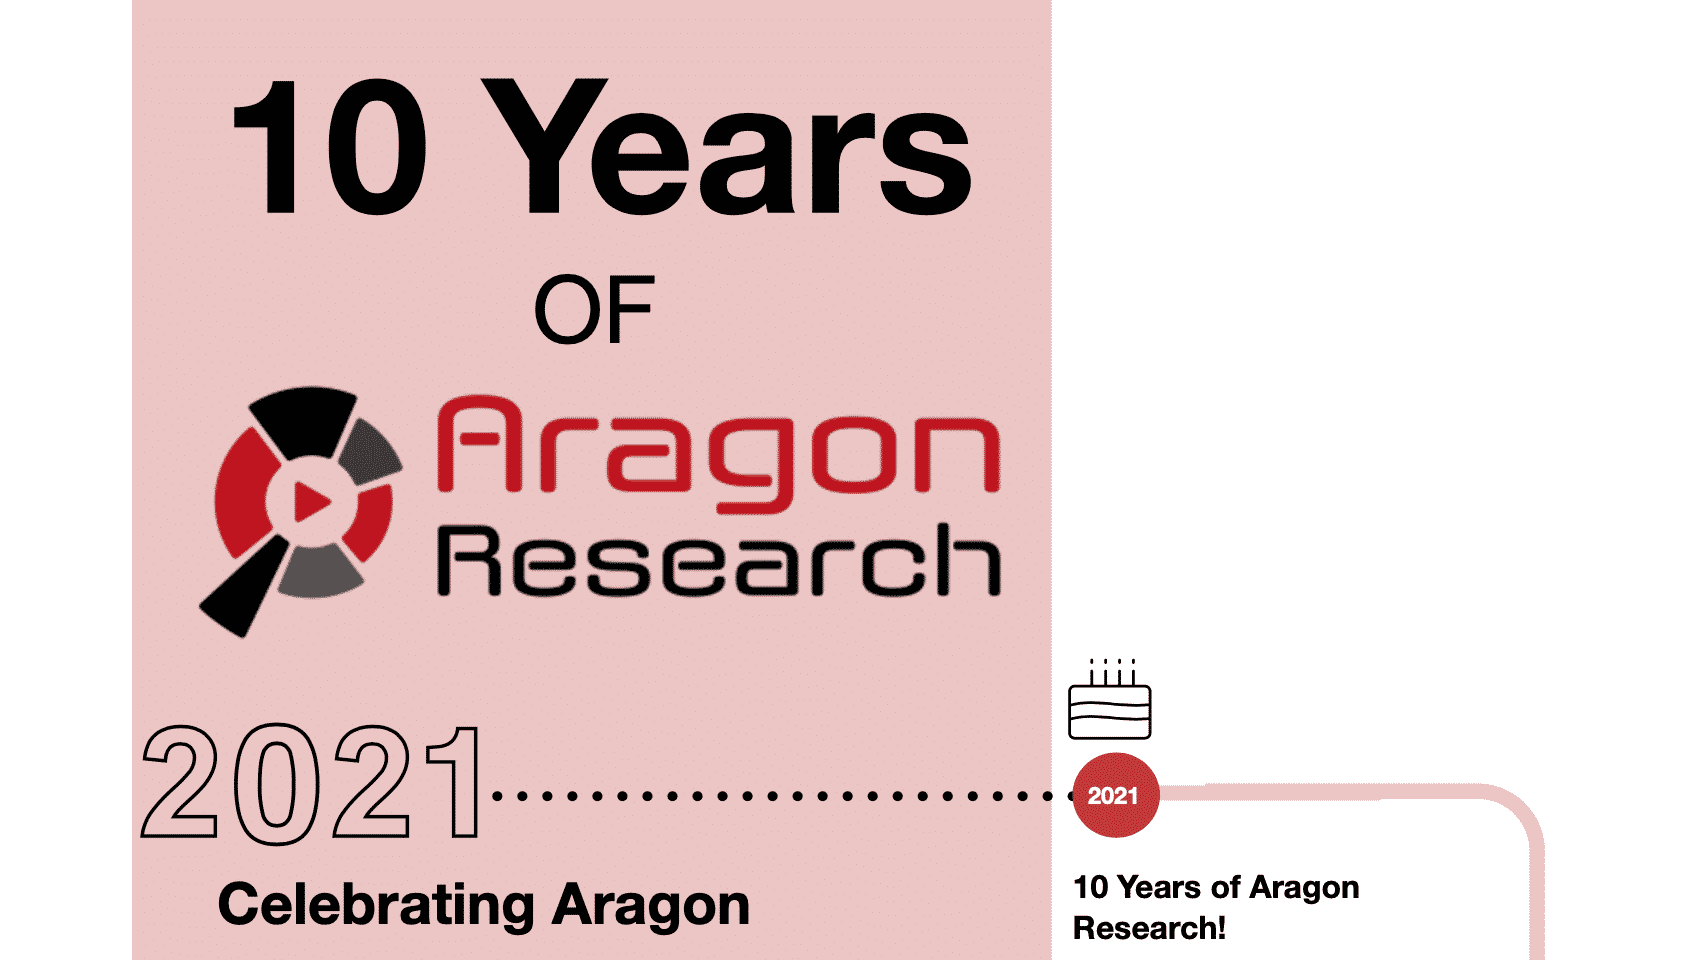 10 years of Aragon Research